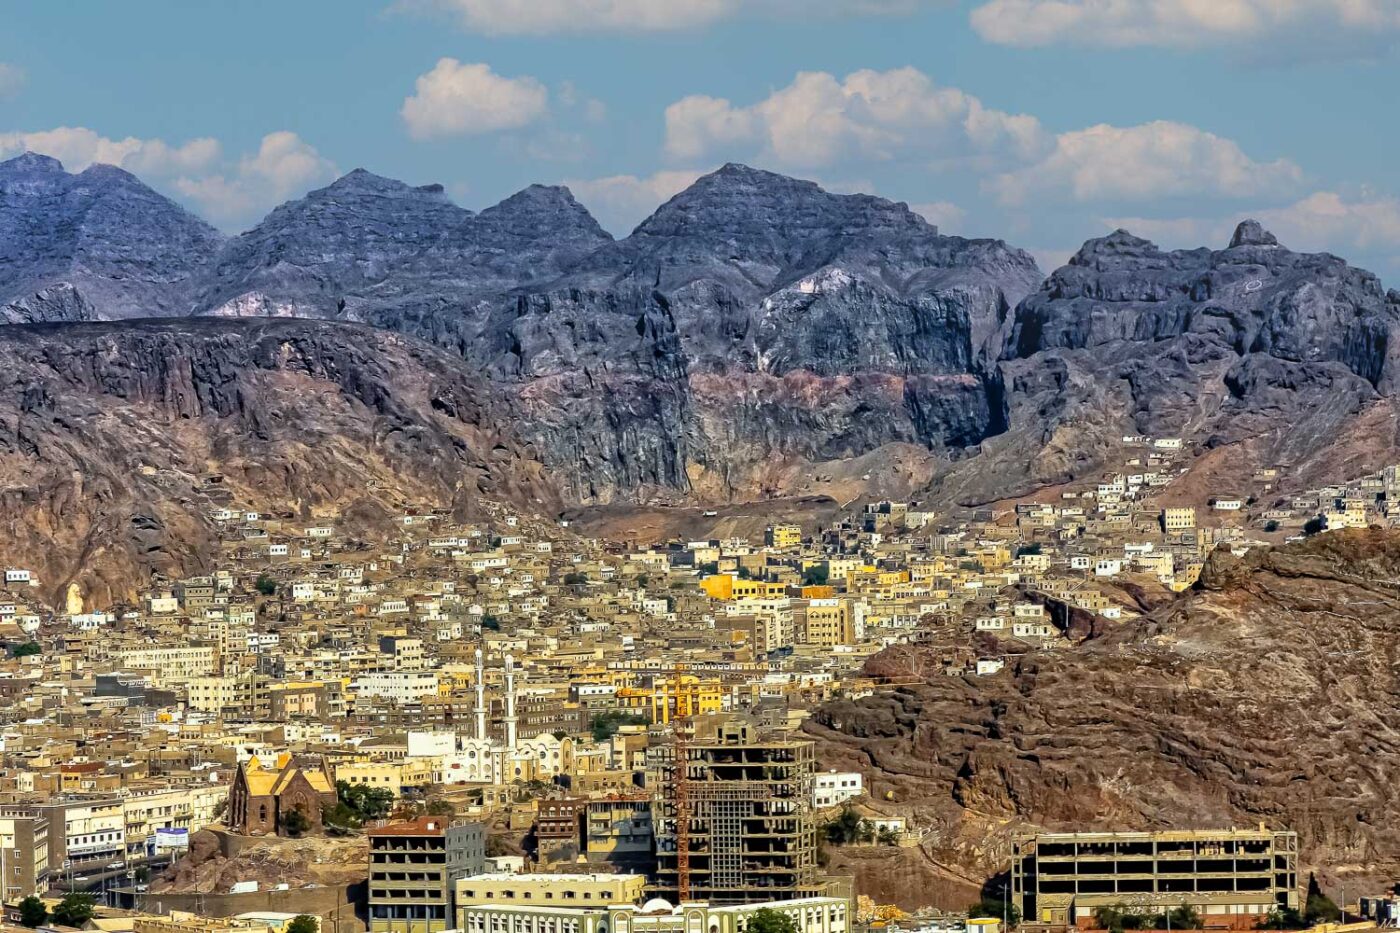 Aden, the city in a volcanic crater